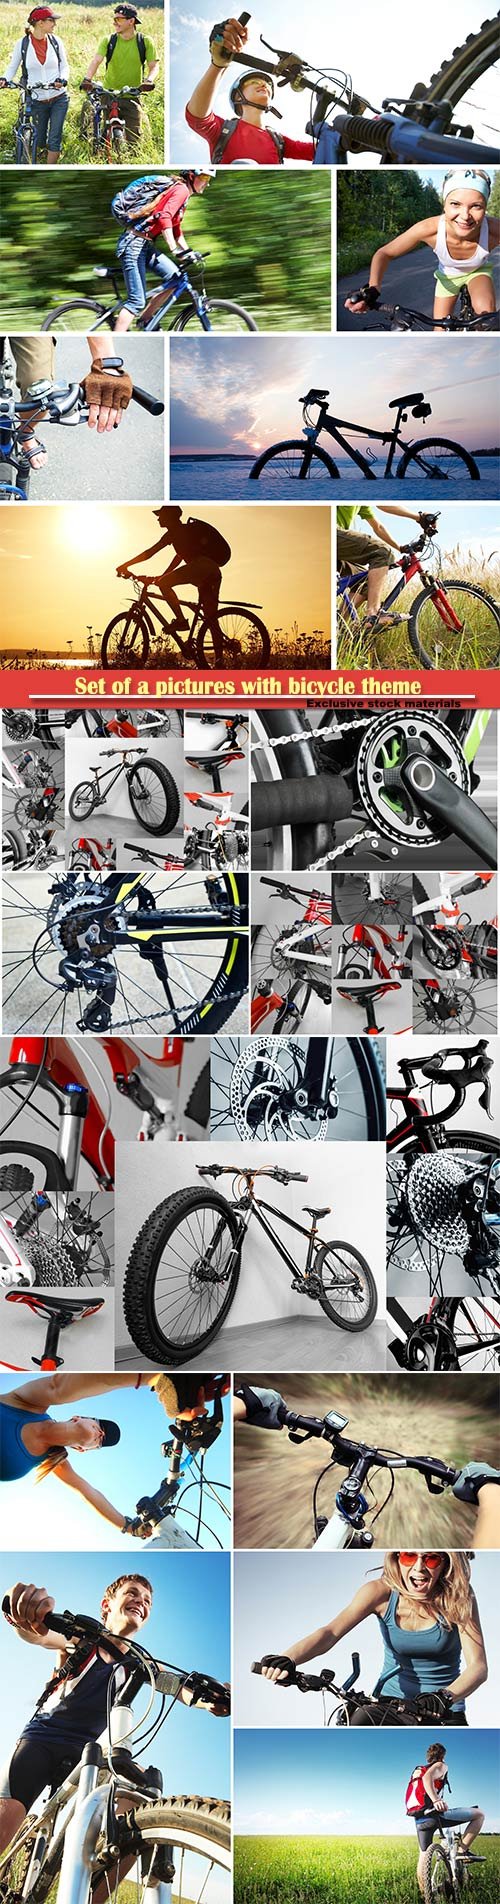 Set of a pictures with bicycle theme